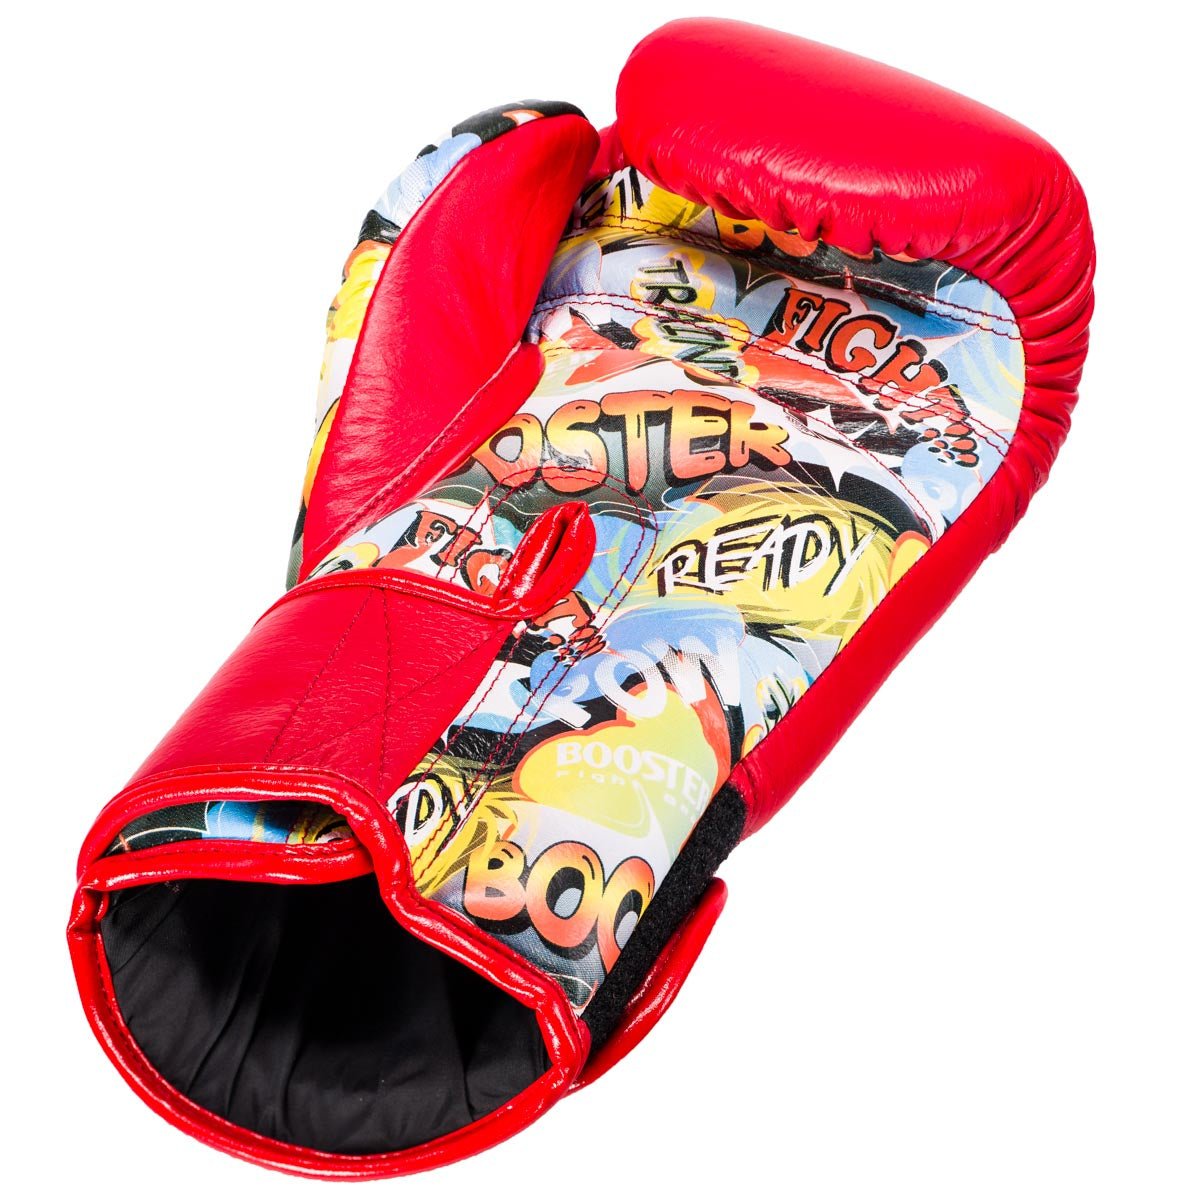 Booster Boxing Gloves COMIC RED - SUPER EXPORT SHOP